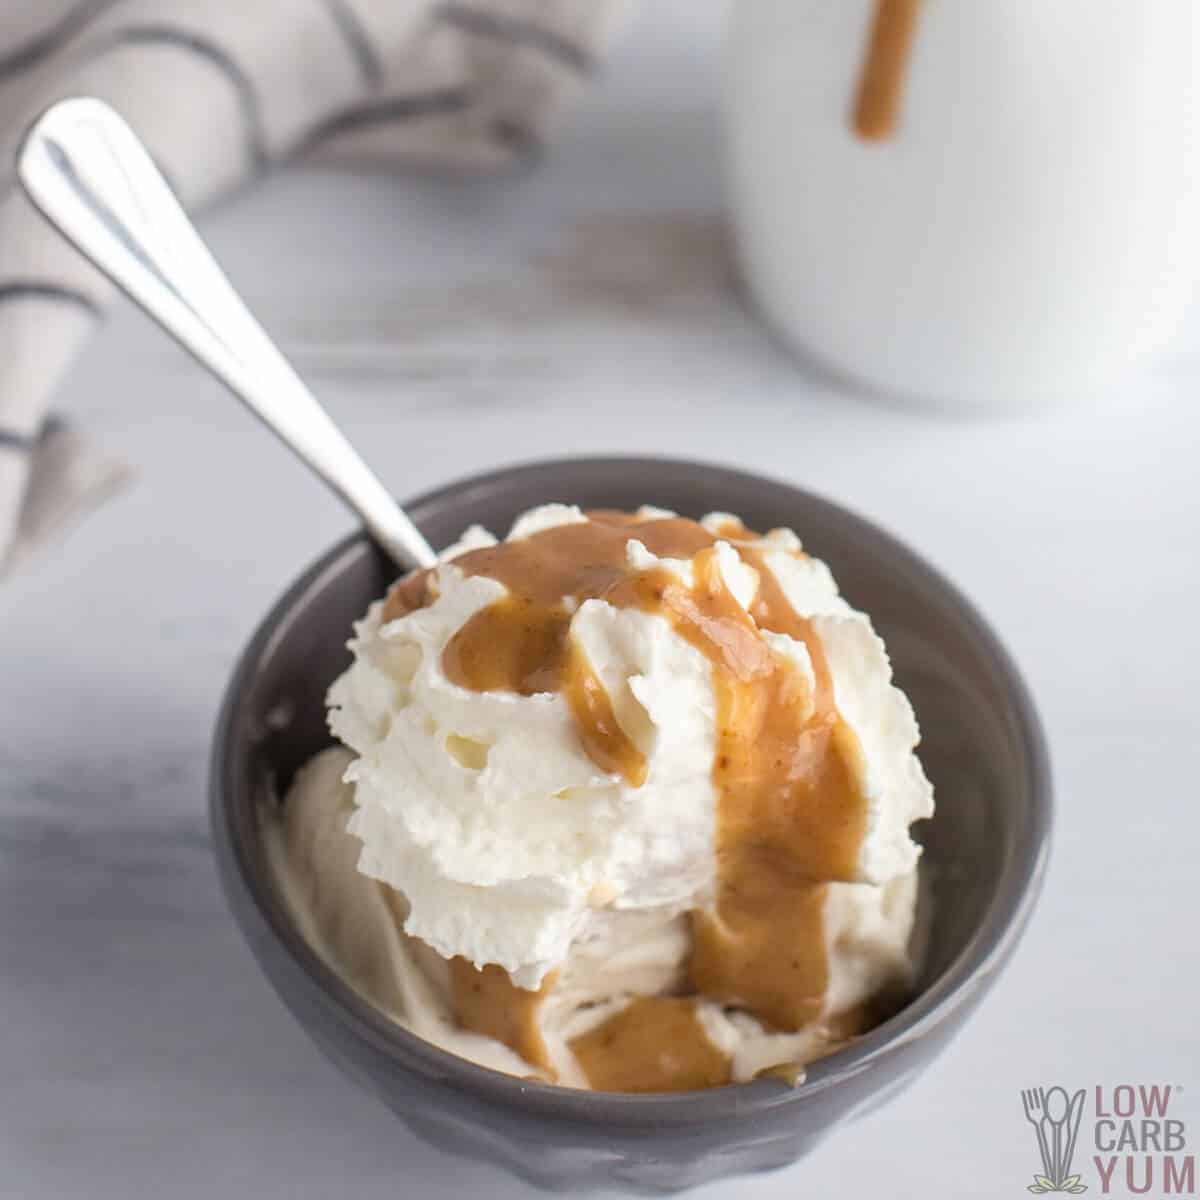 peanut butter sauce over ice cream with whipped cream.